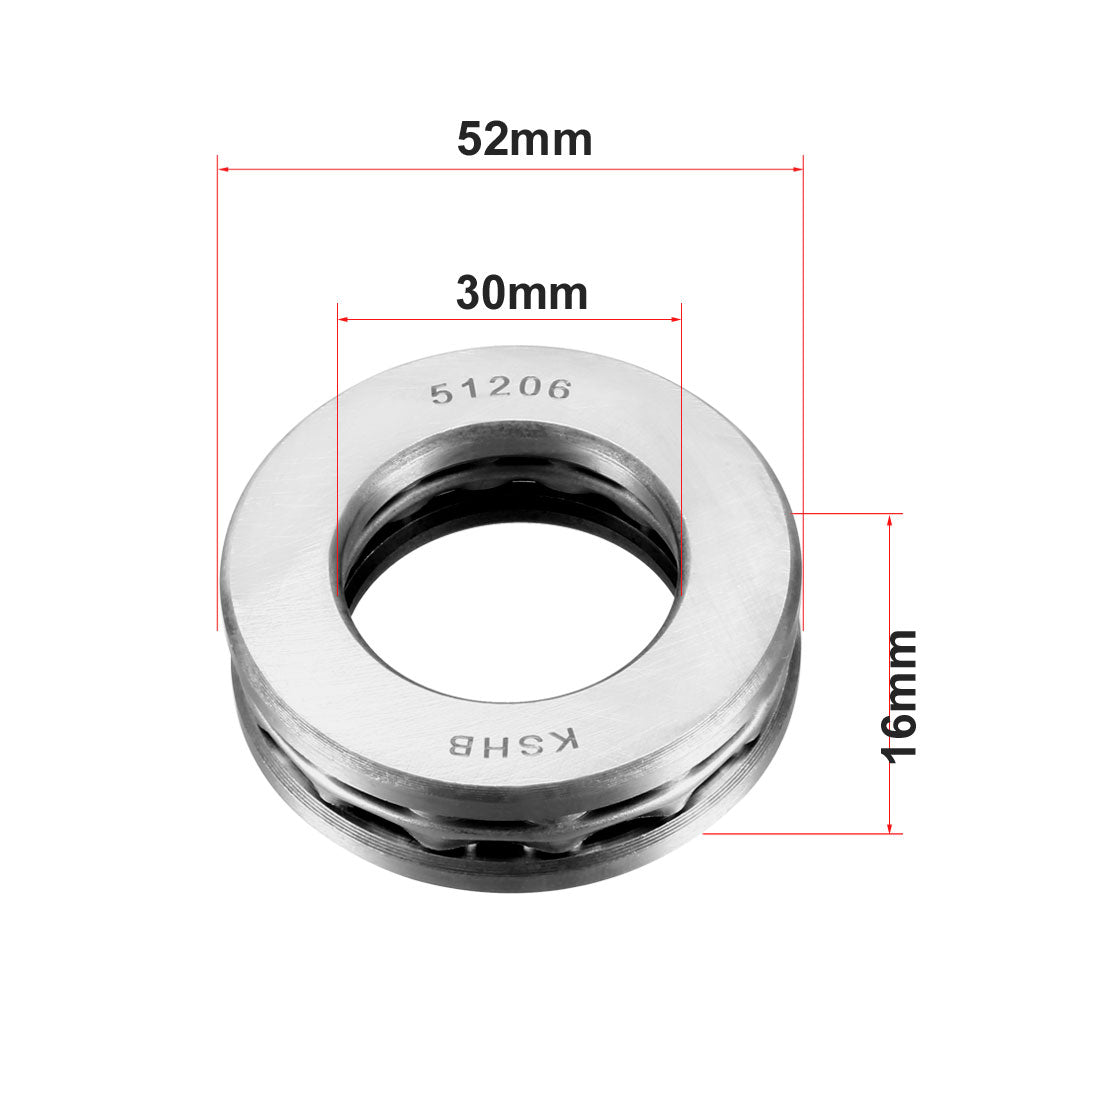 uxcell Uxcell 51206 Single Direction Thrust Ball Bearings 30mm x 52mm x 16mm Chrome Steel